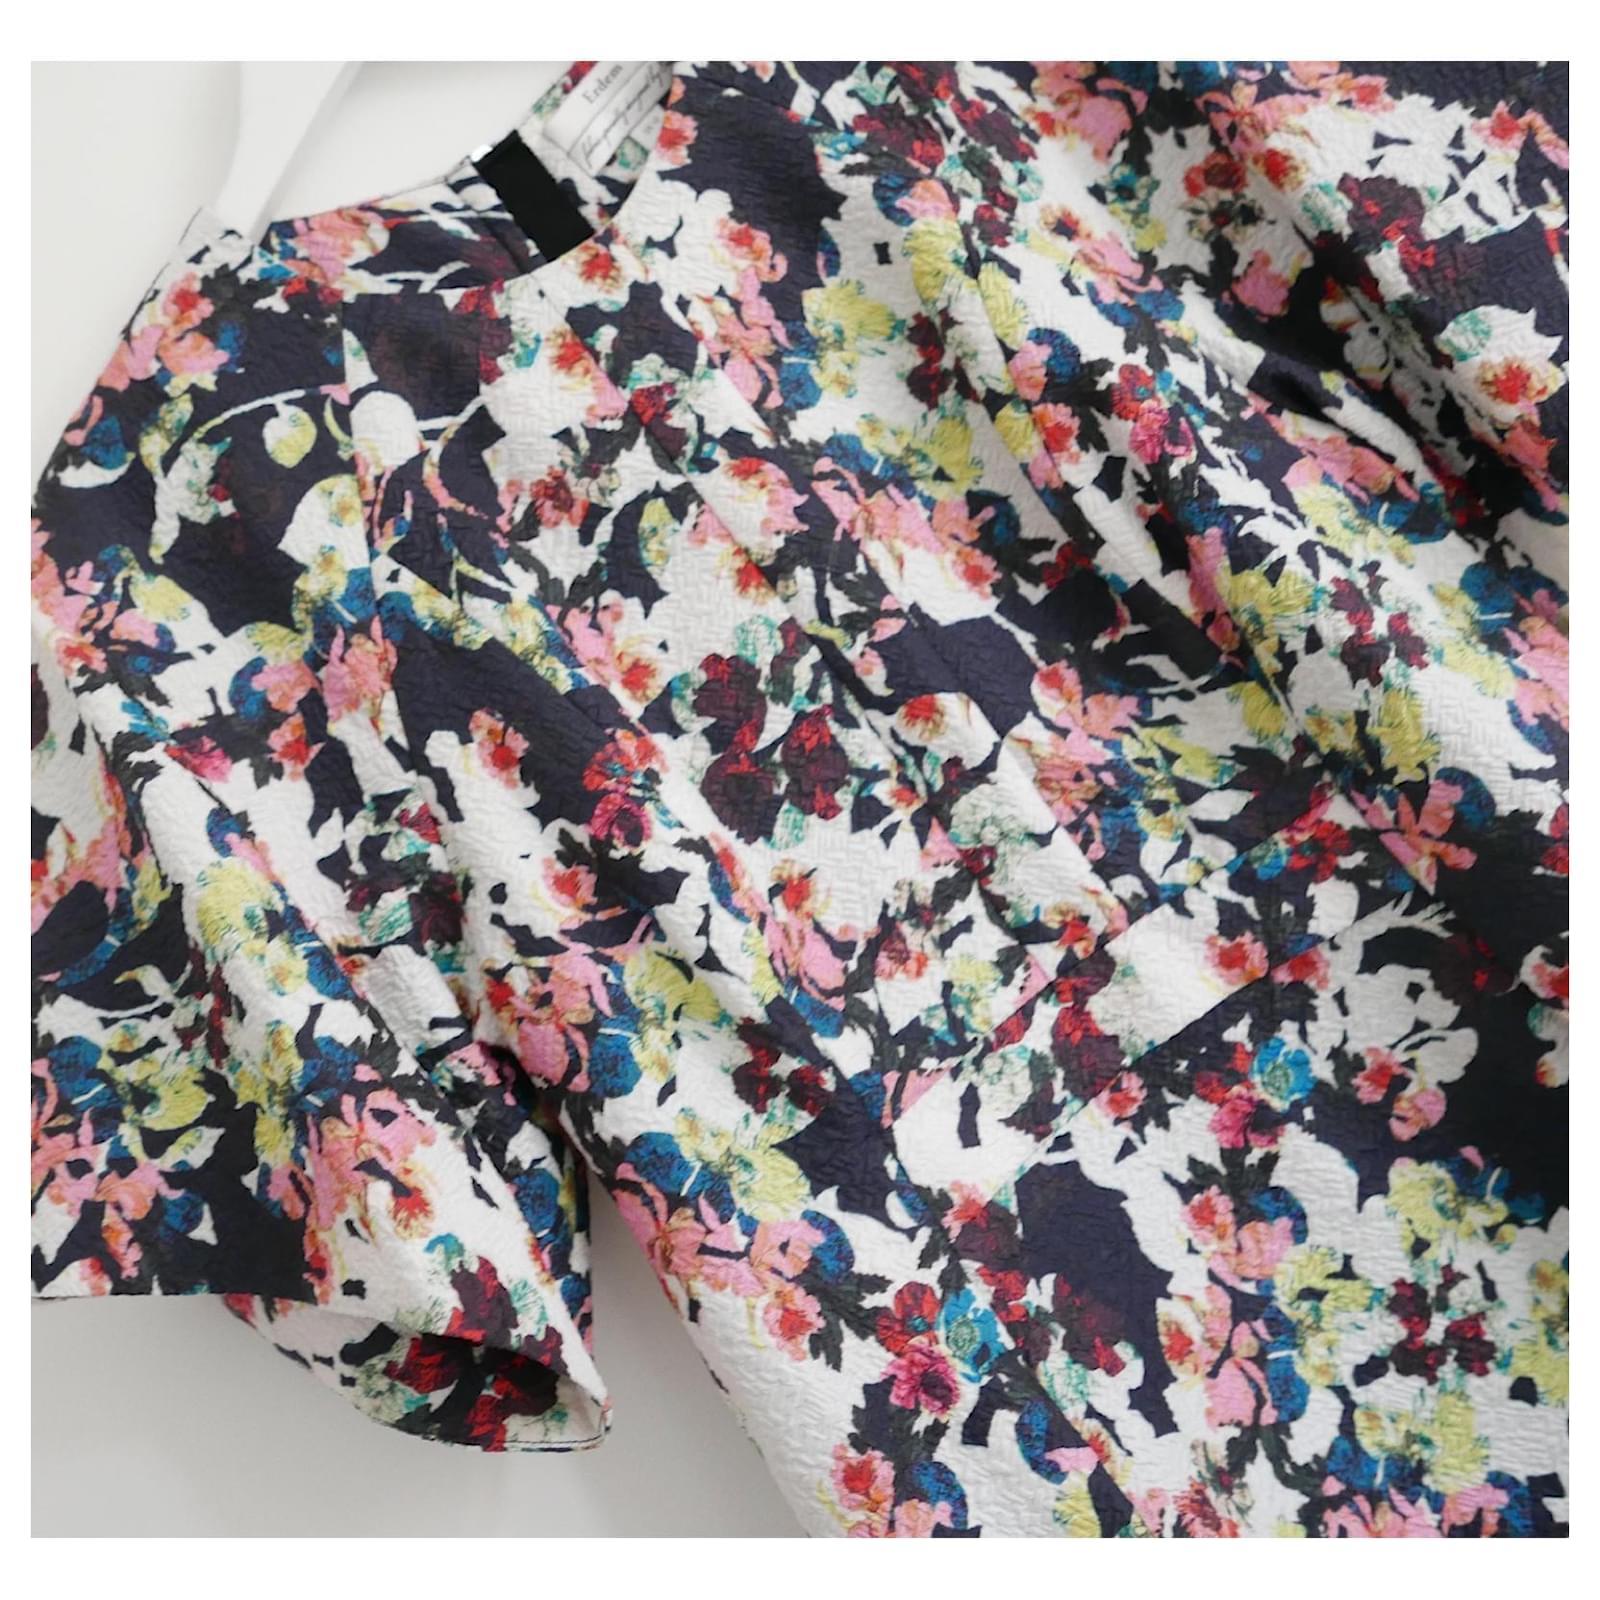 Gorgeous Erdem Cliona dress - bought for £850 and unworn. Made from soft, vibrantly floral print, textured silk and nylon with silk lining. It has a flattering slim silhouette with tailored bodice and waist and side pockets. Zip to back. Size UK10.